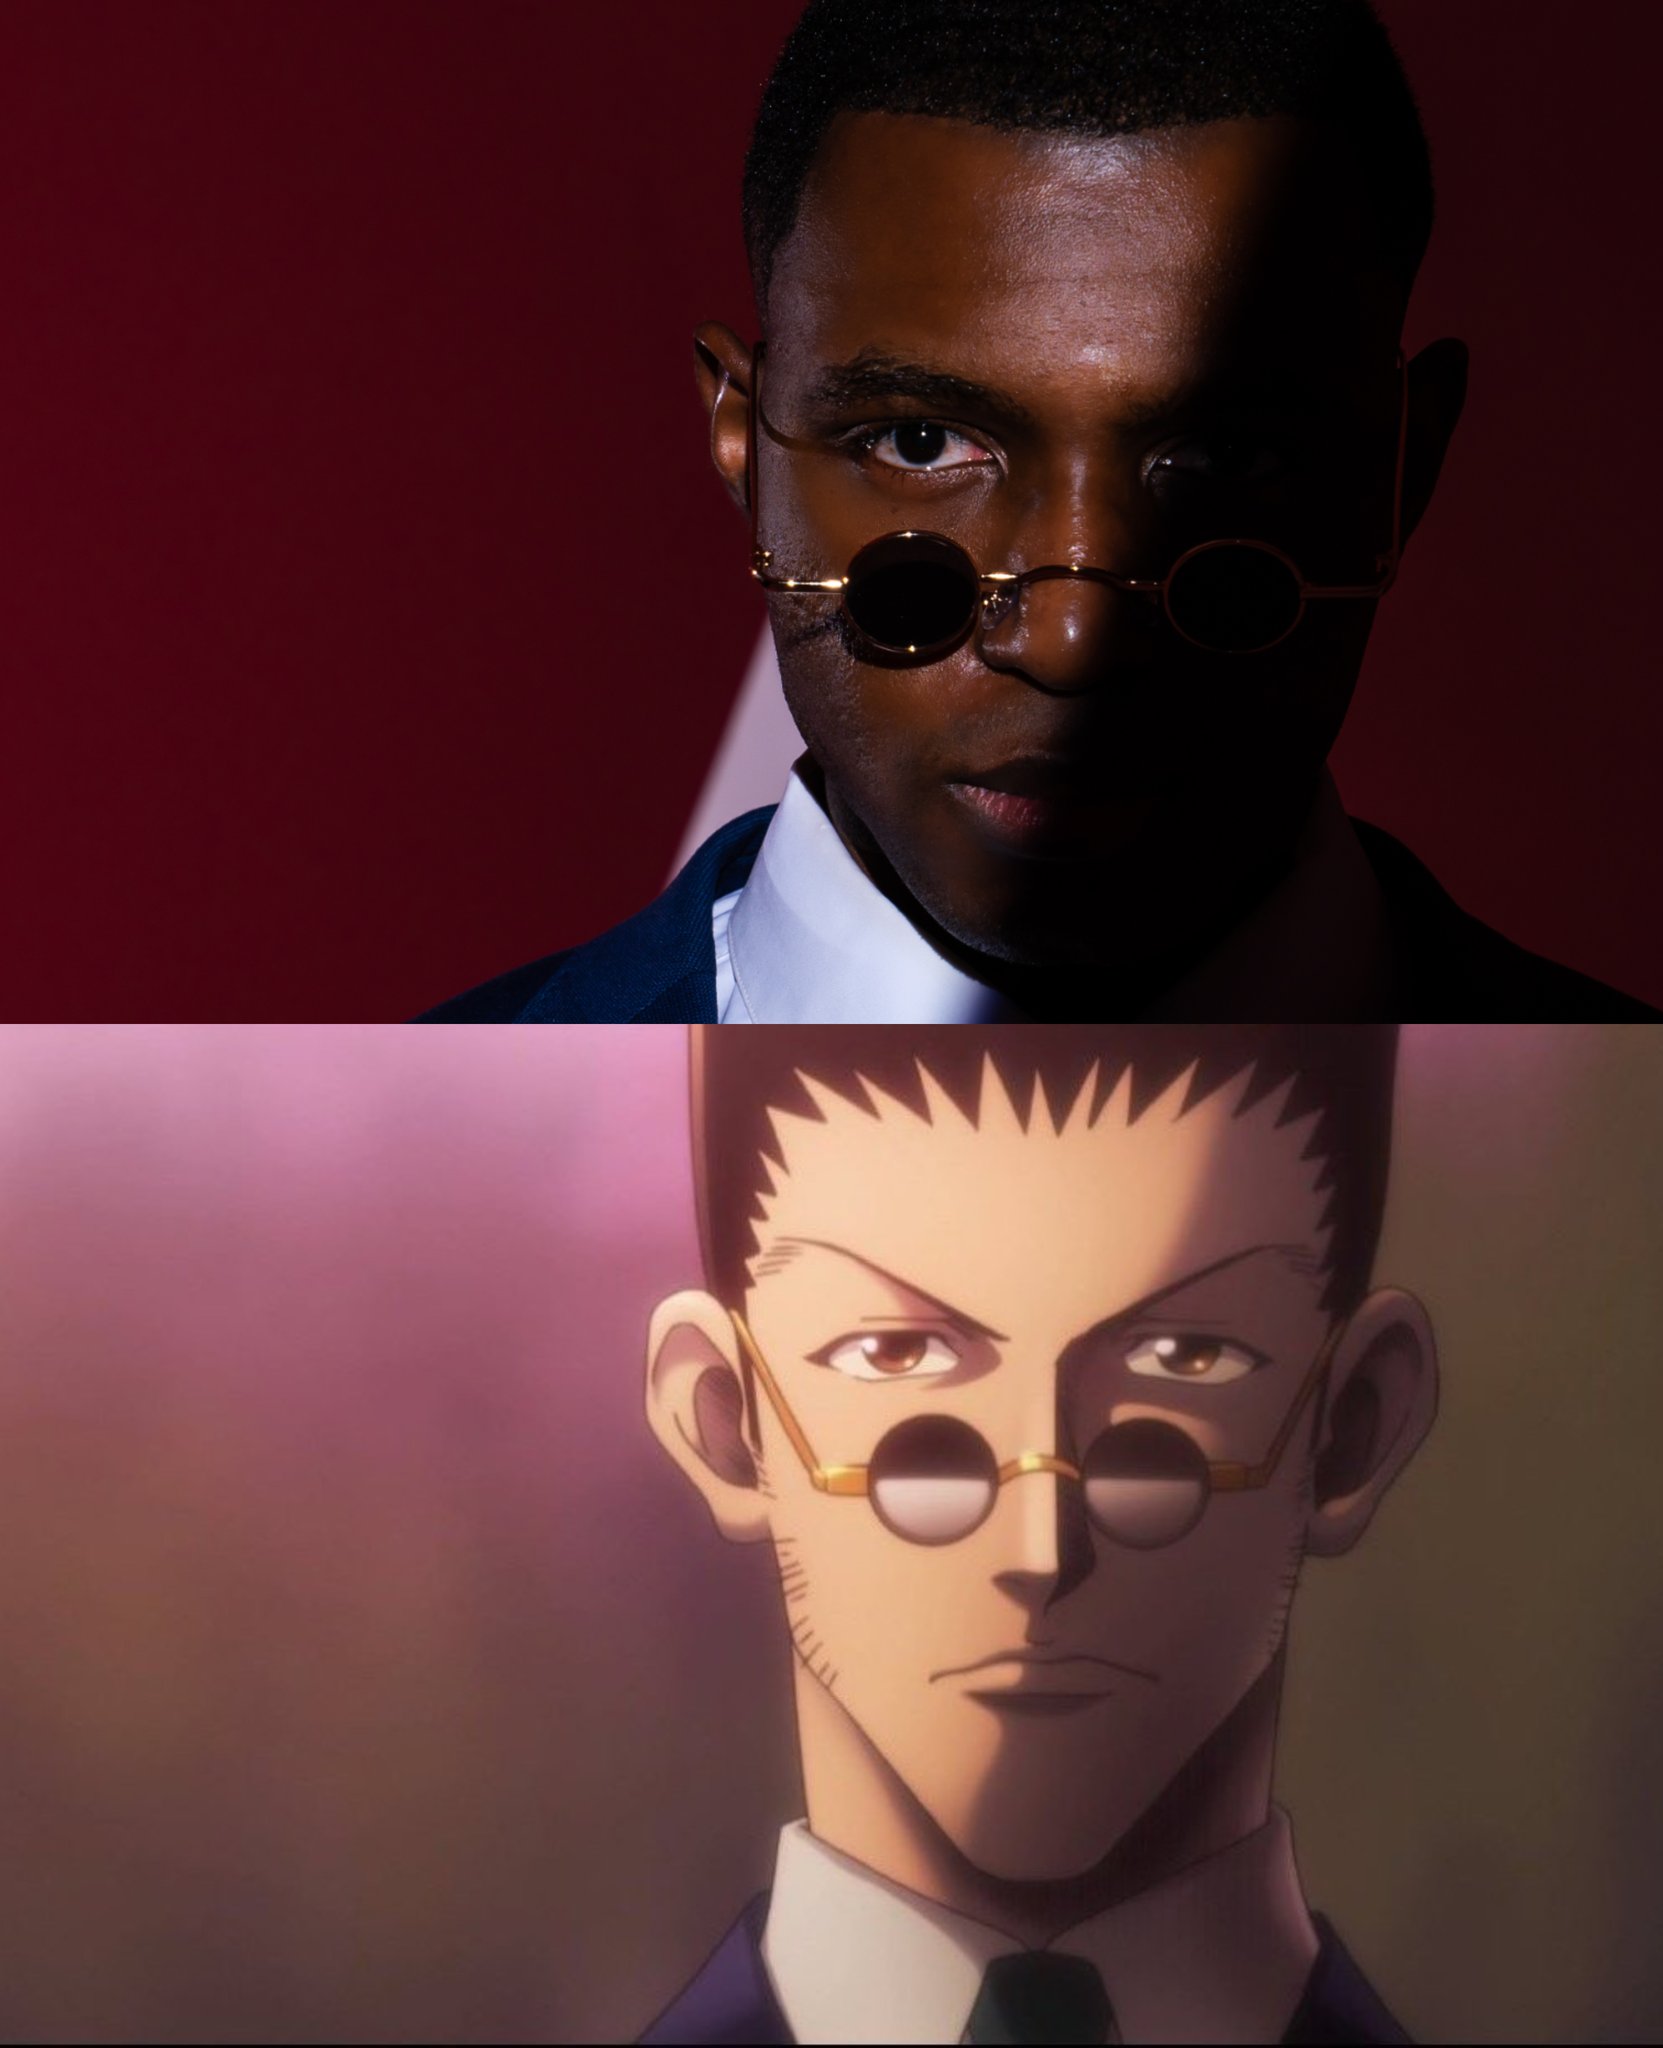 Fresh from the meme market — Iyami's face on Leorio from HxH